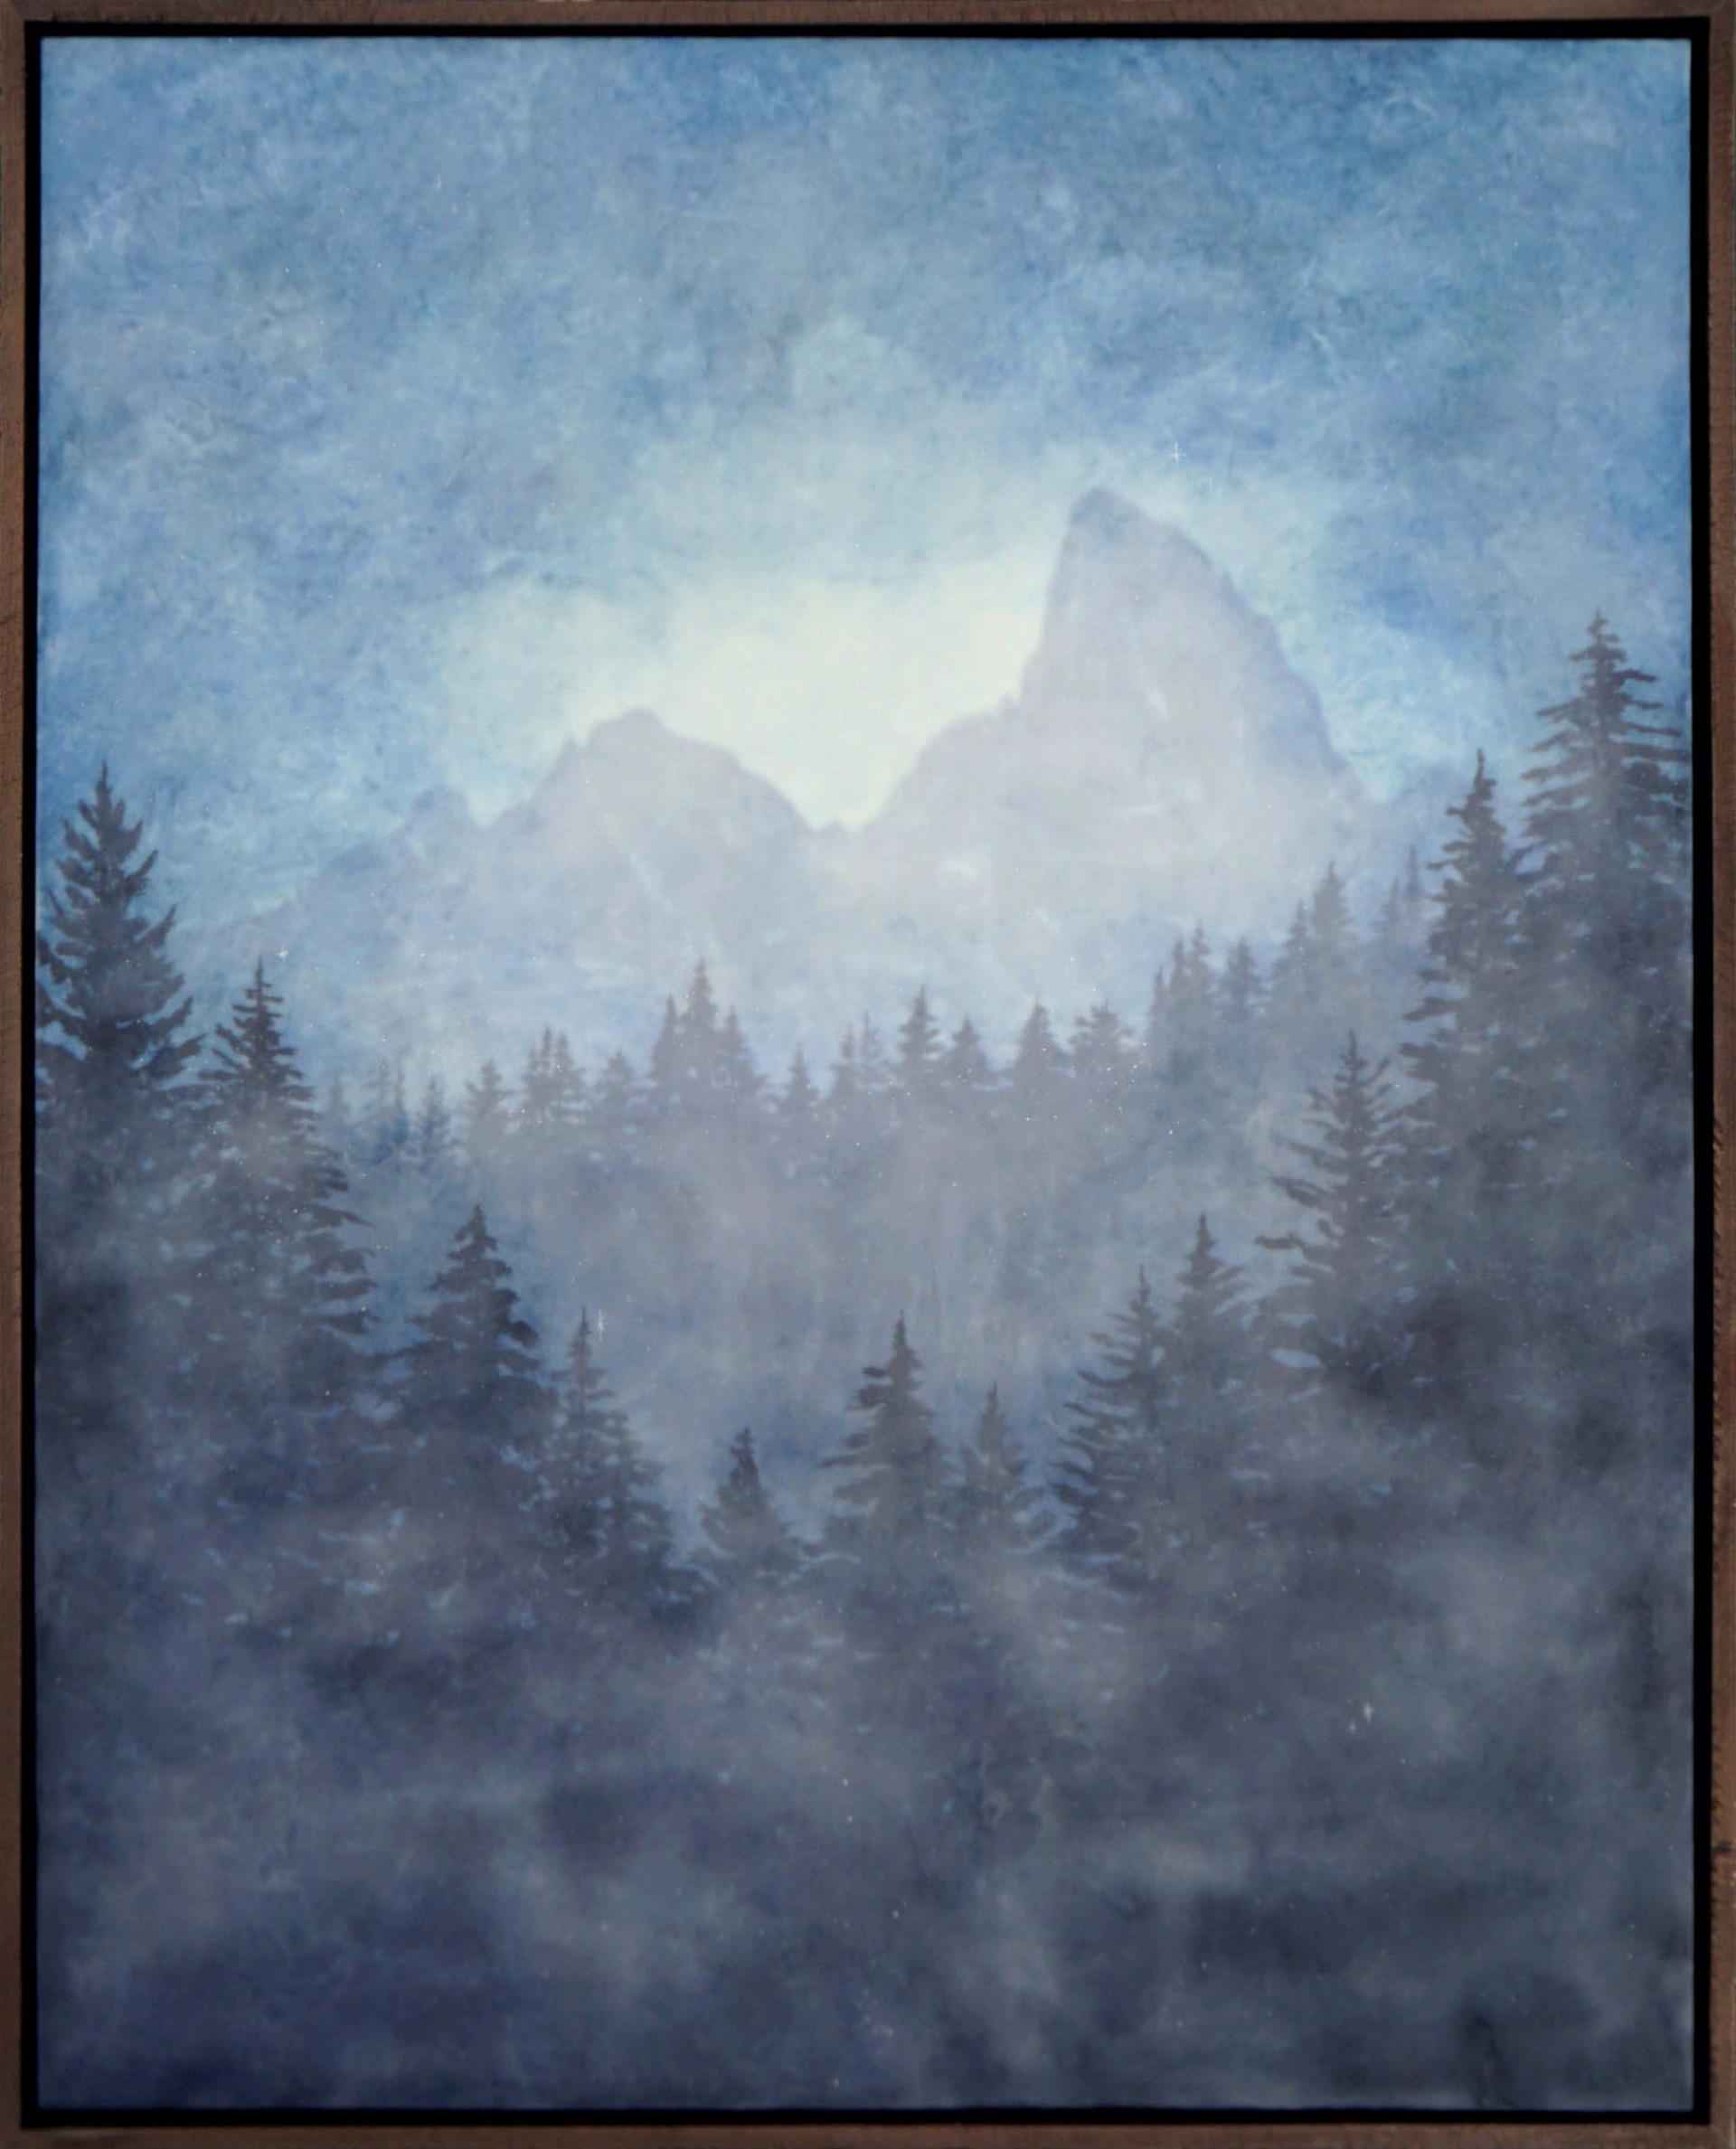 Original Encaustic Landscape Painting Featuring A Mountain Peak Seen Through Blue Hazy Clouds And Dark Pine Trees